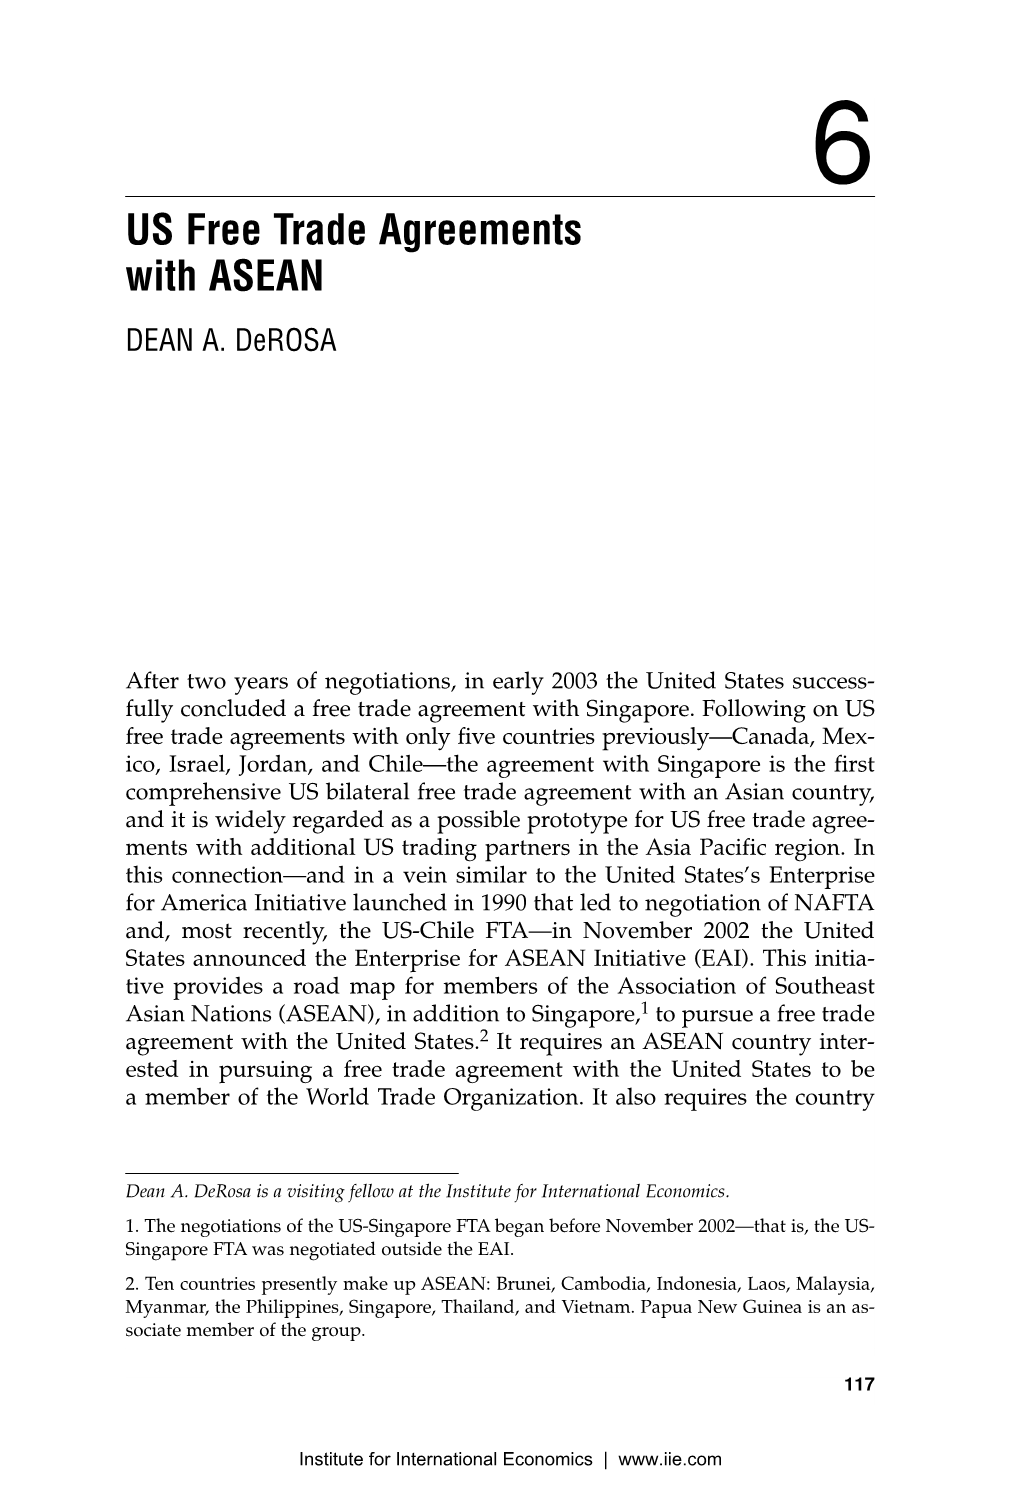 US Free Trade Agreements with ASEAN DEAN A